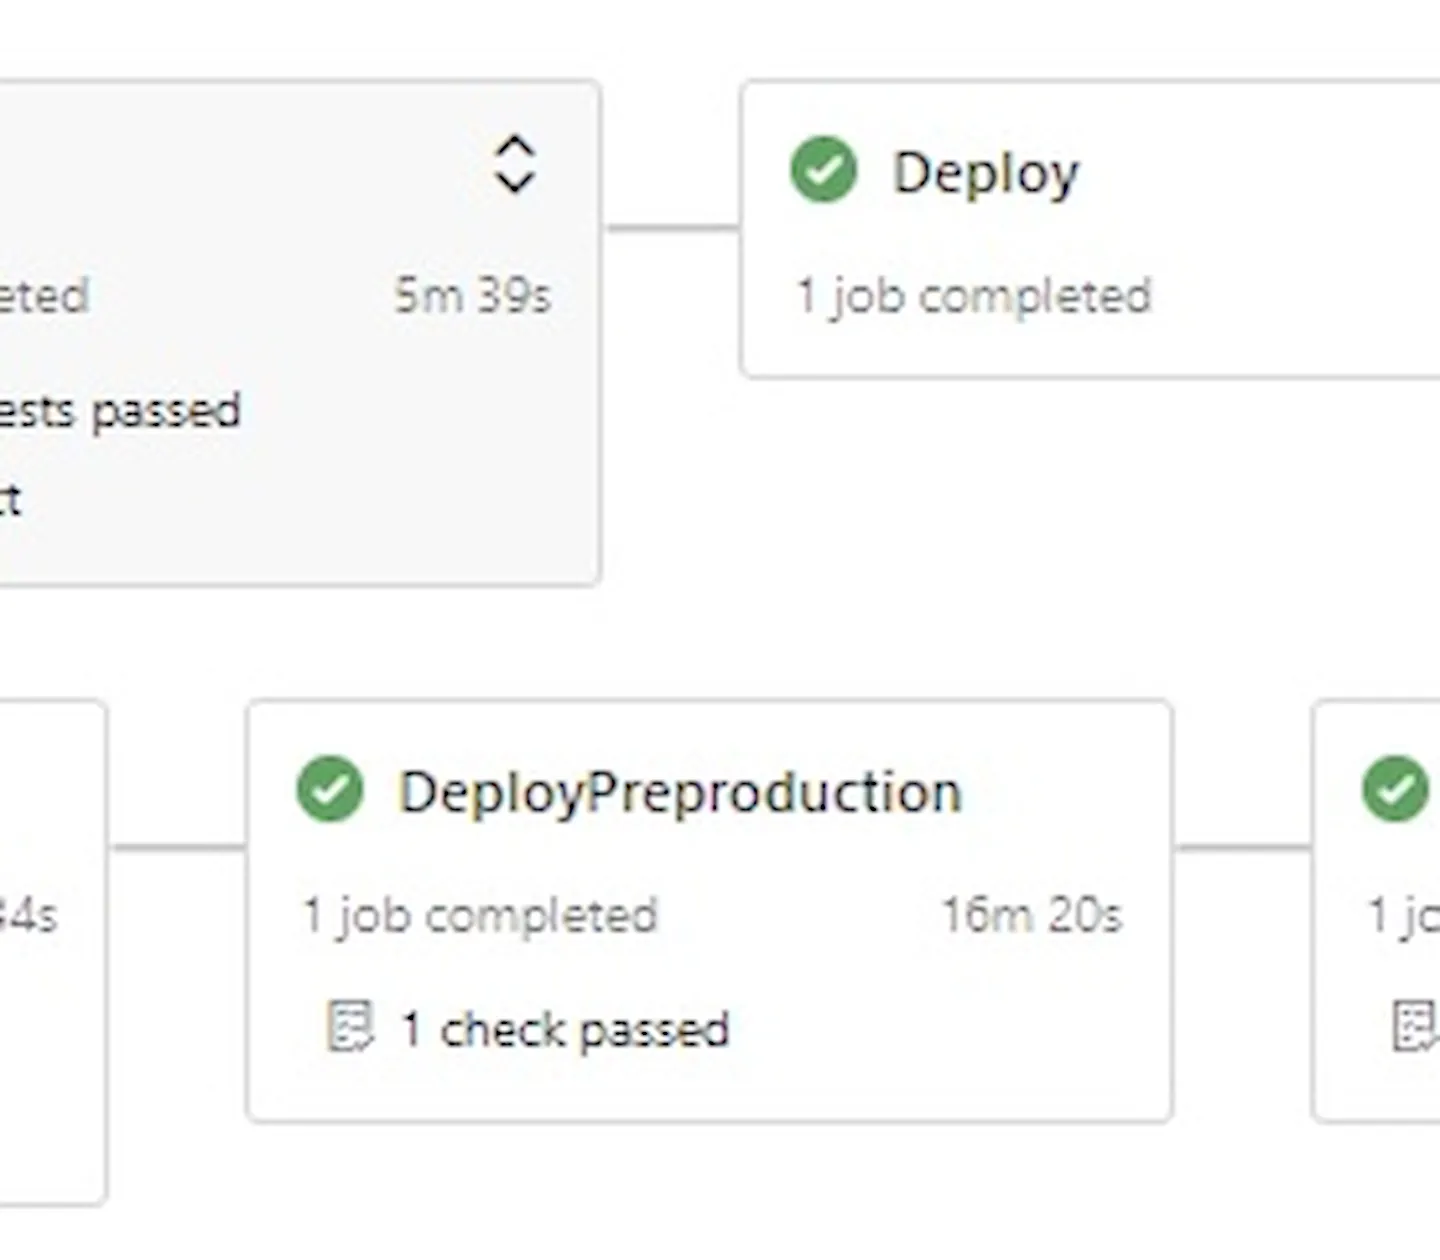 How to set up a CI/CD pipeline